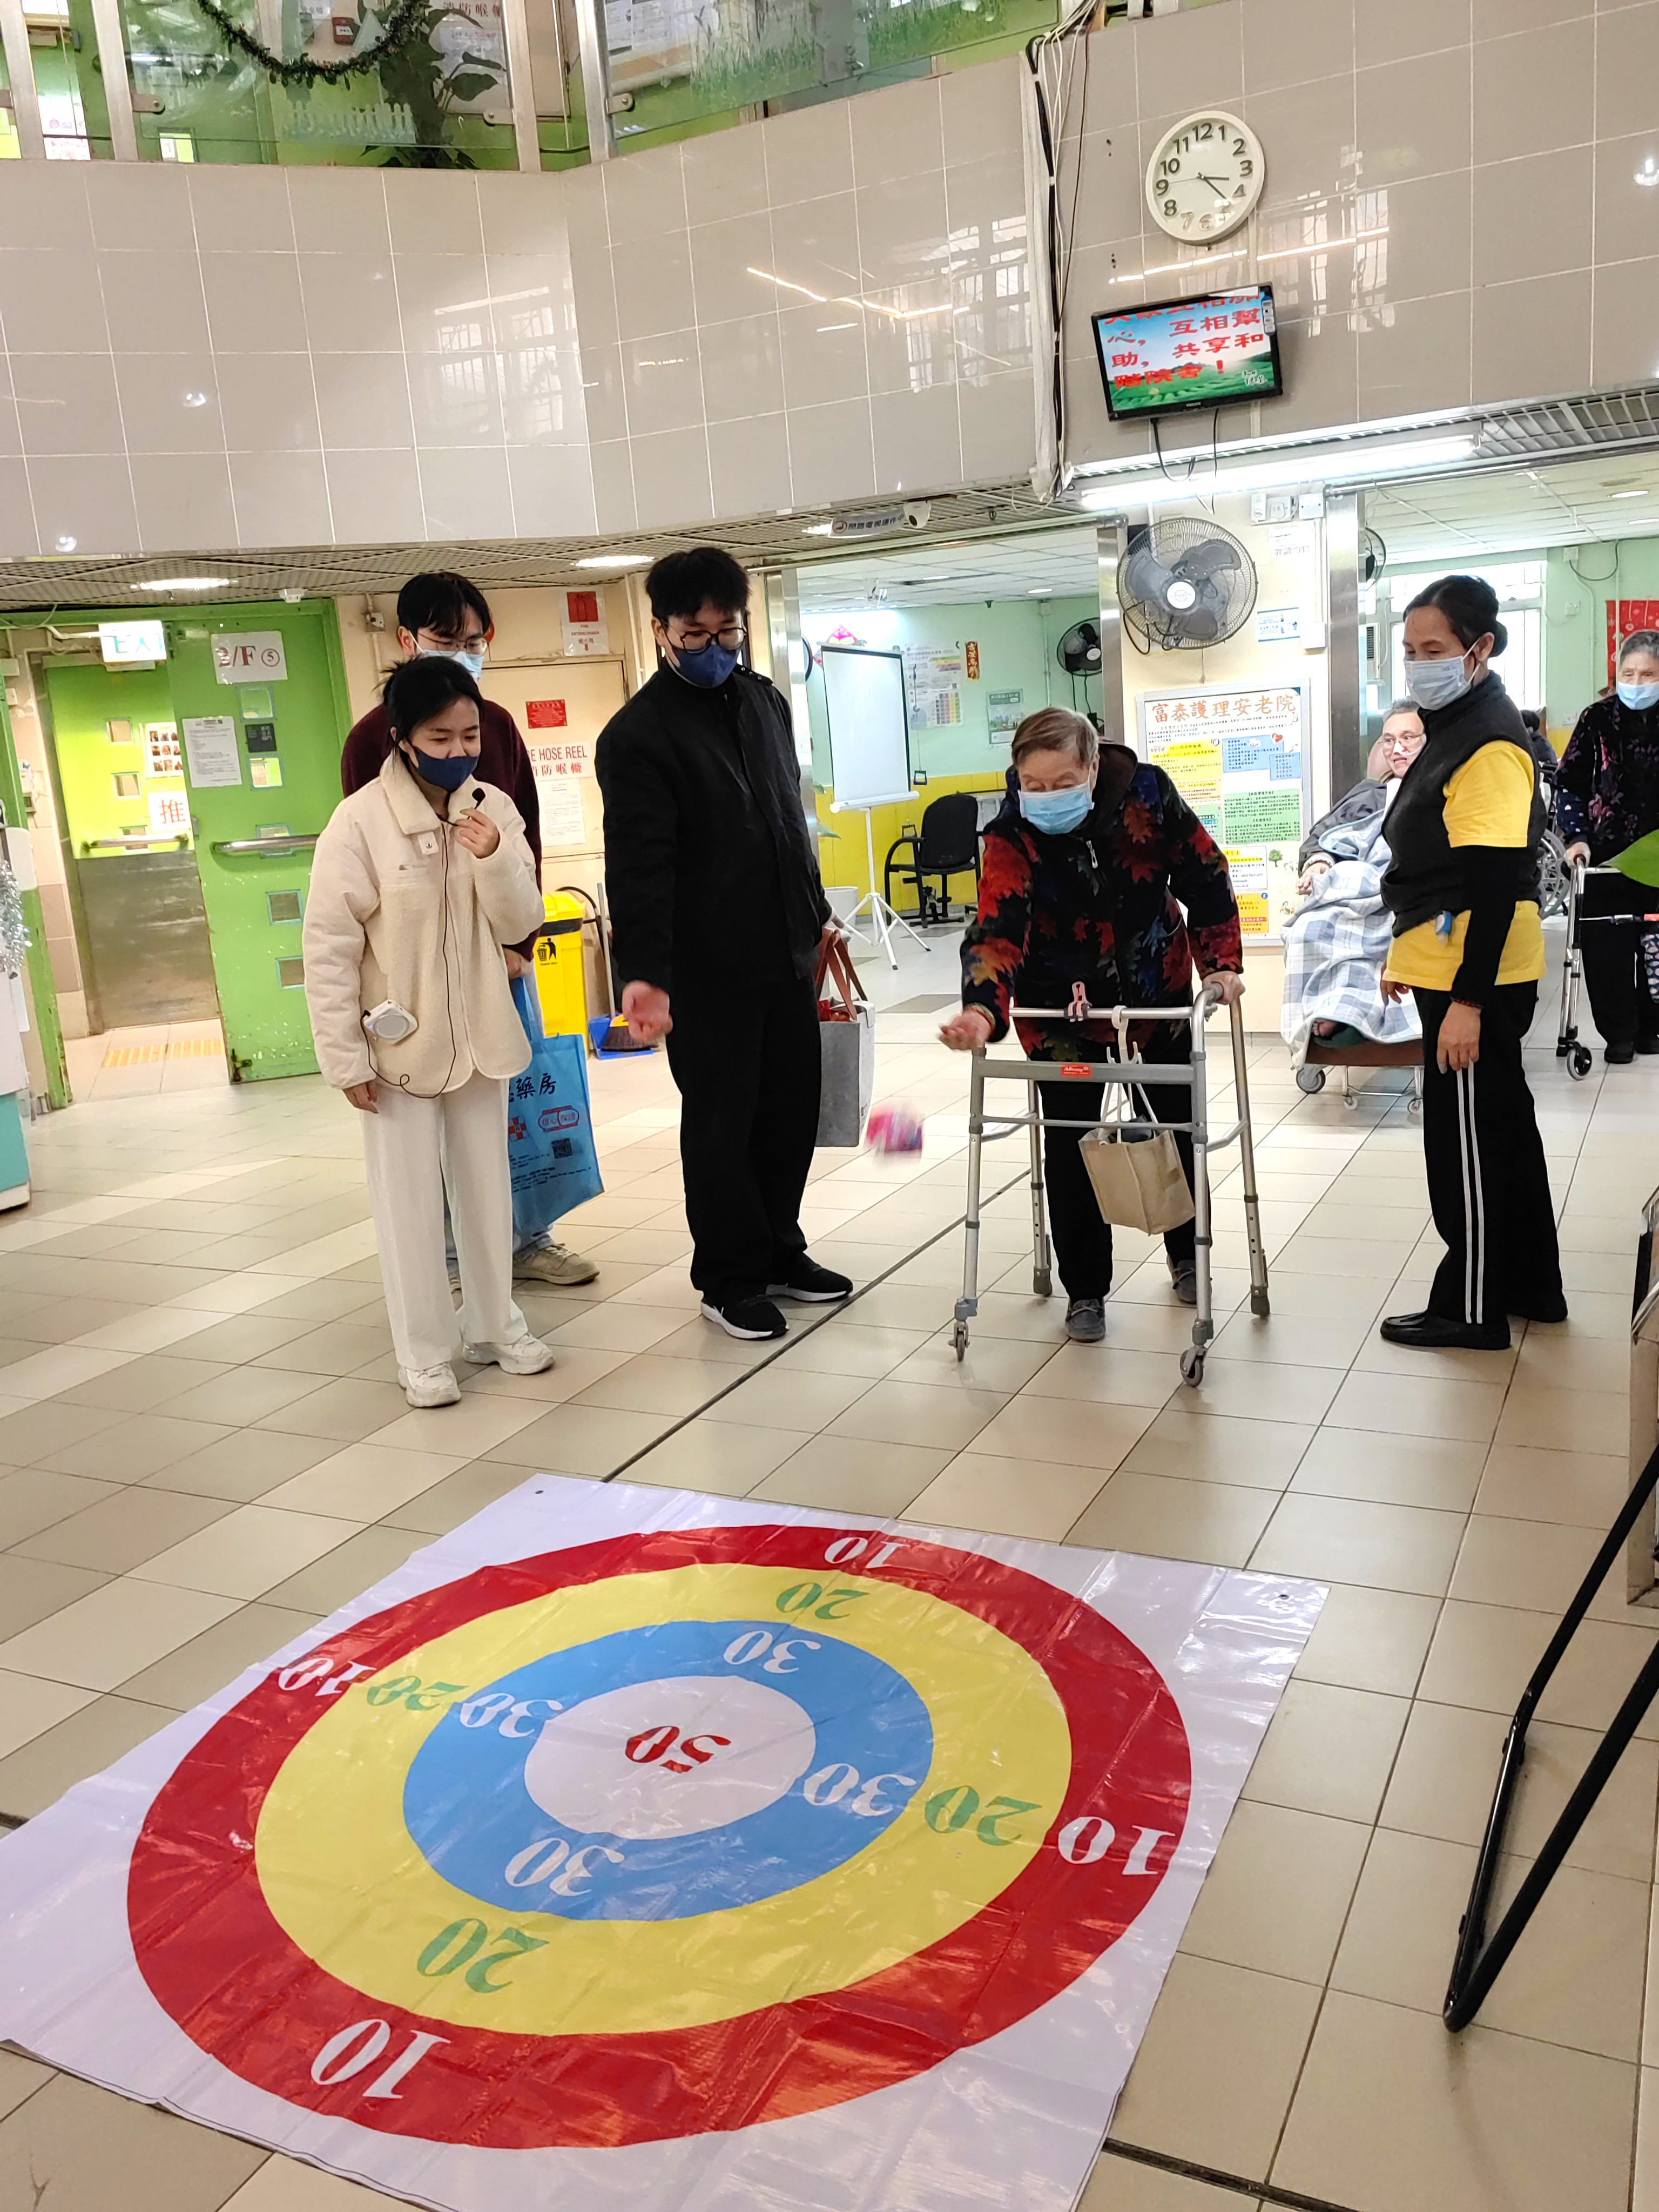 The staff and the elderly learners participated in games